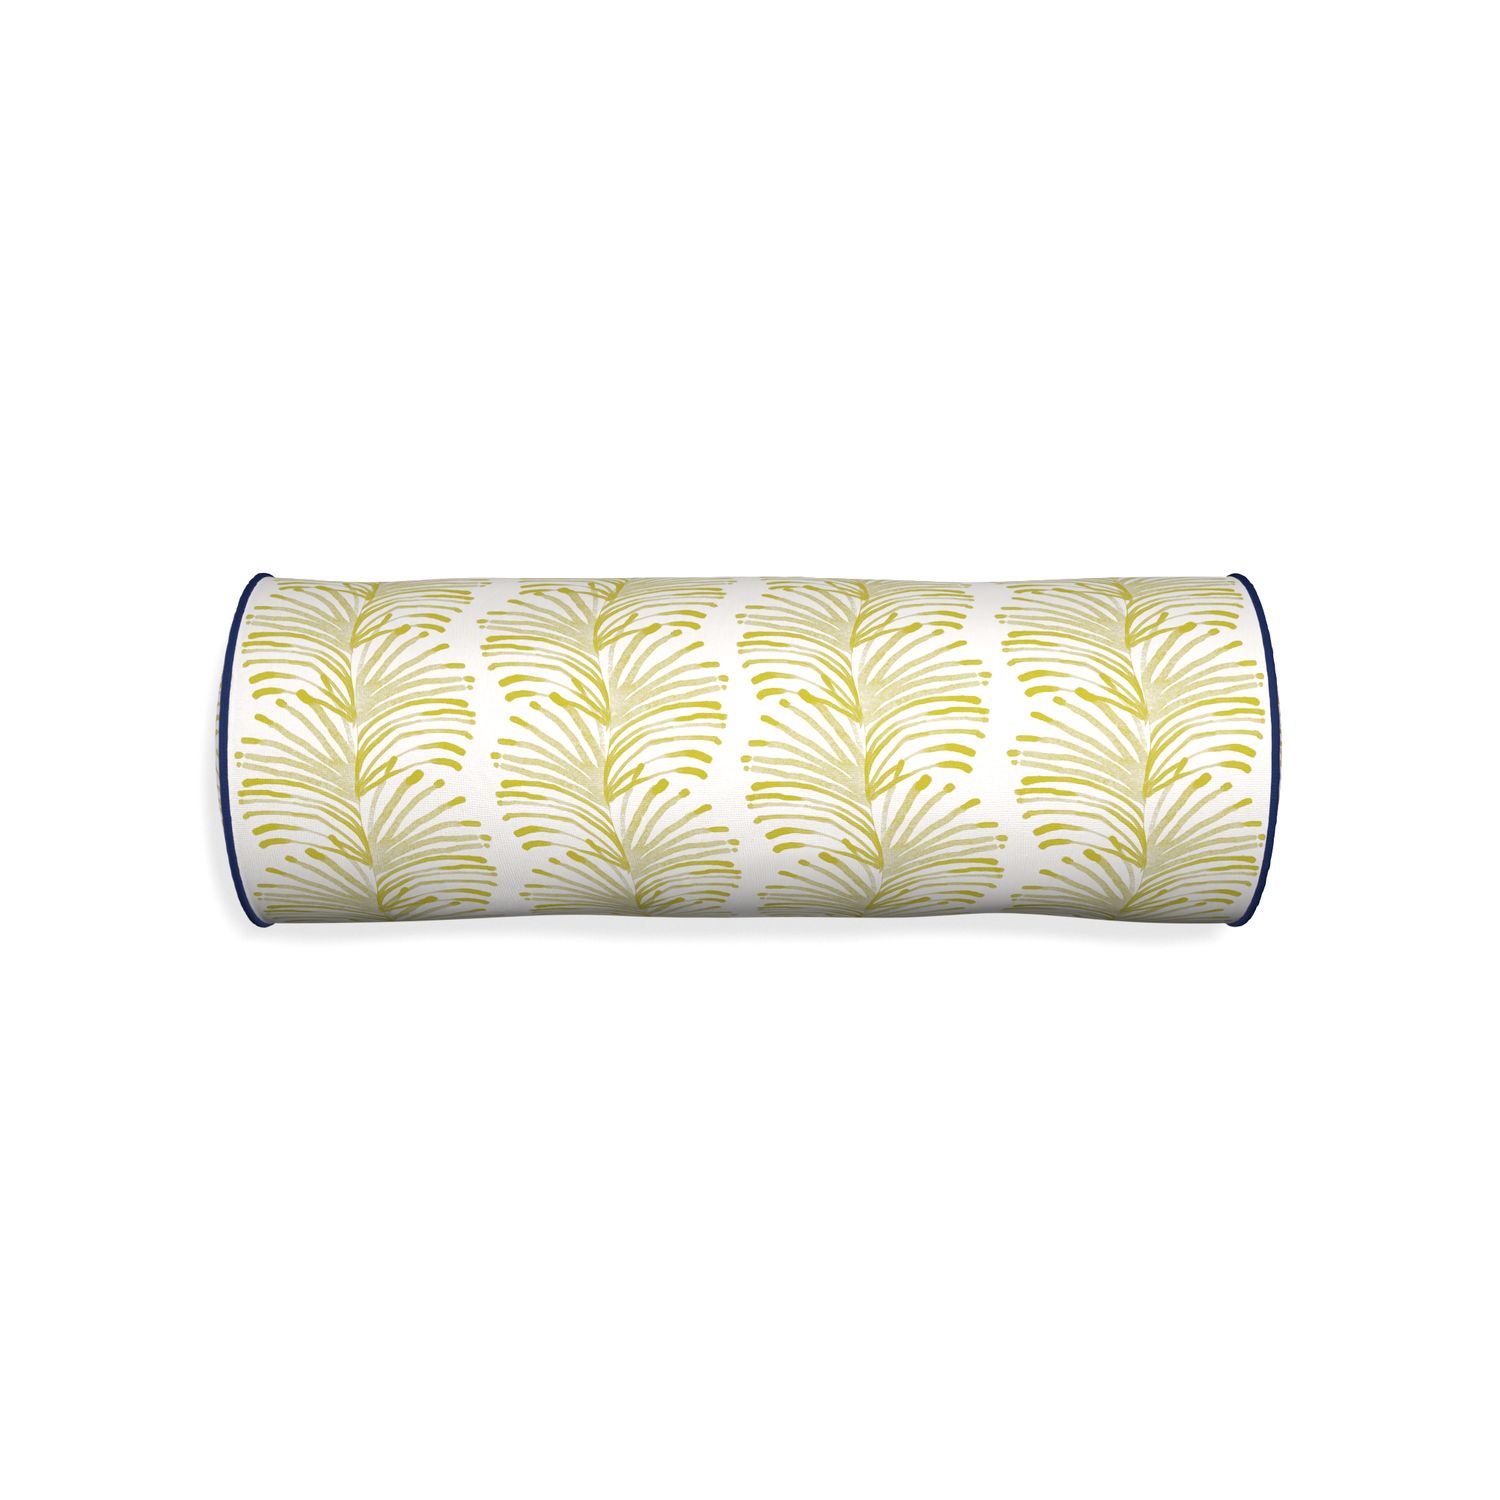 Bolster emma chartreuse custom pillow with midnight piping on white background